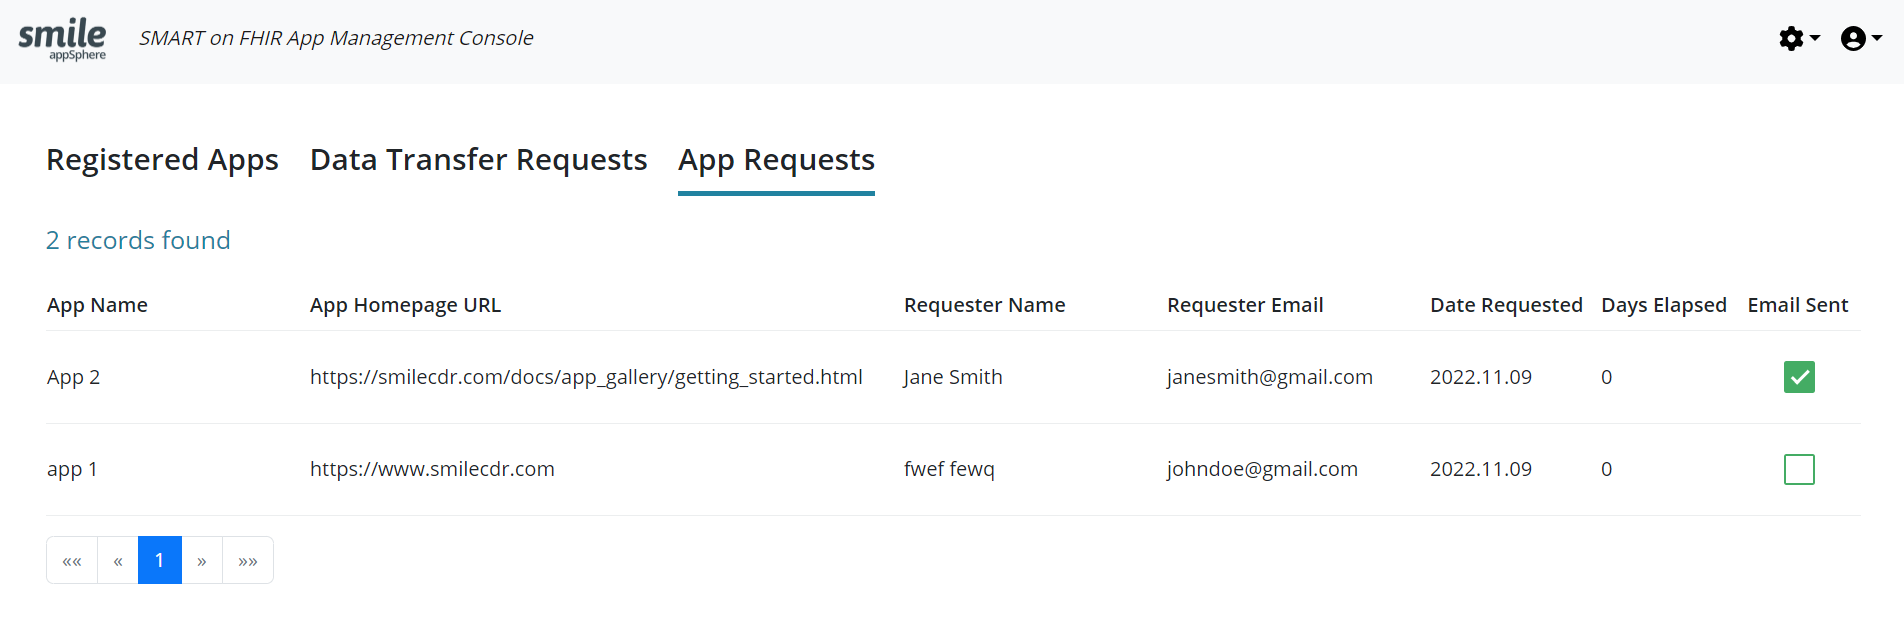 App Request Table